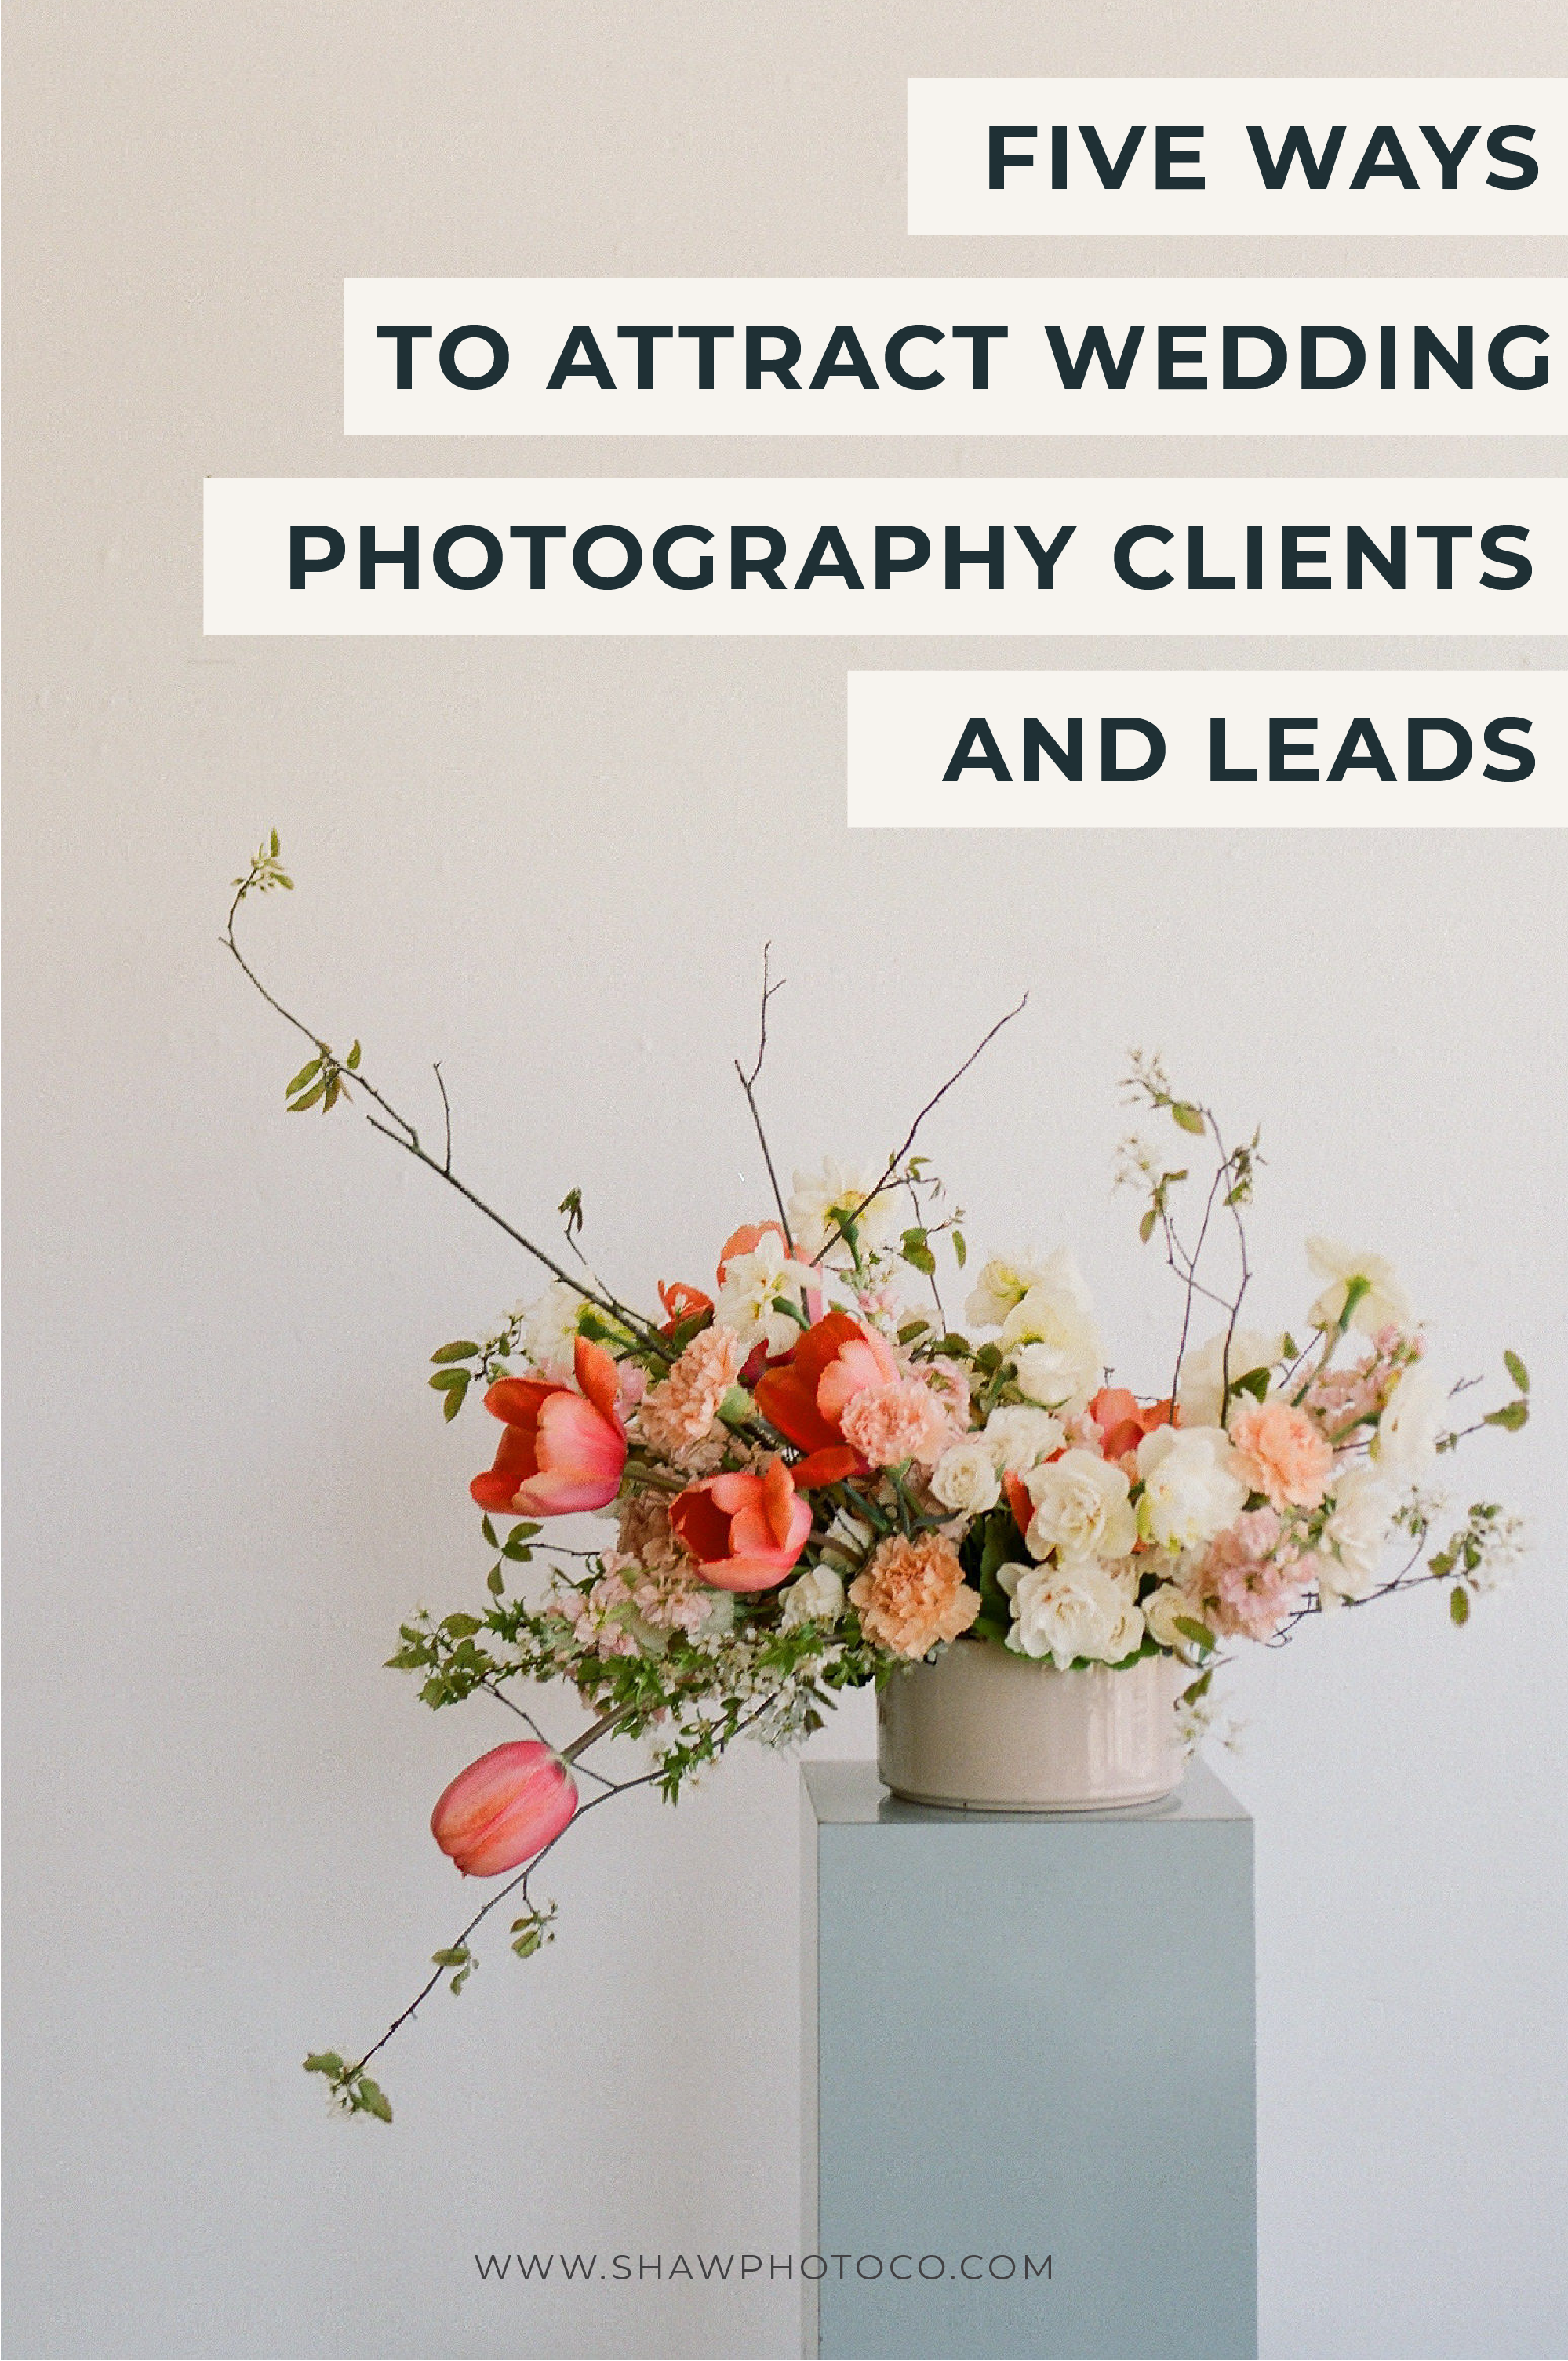 5 ways to attract wedding photography clients